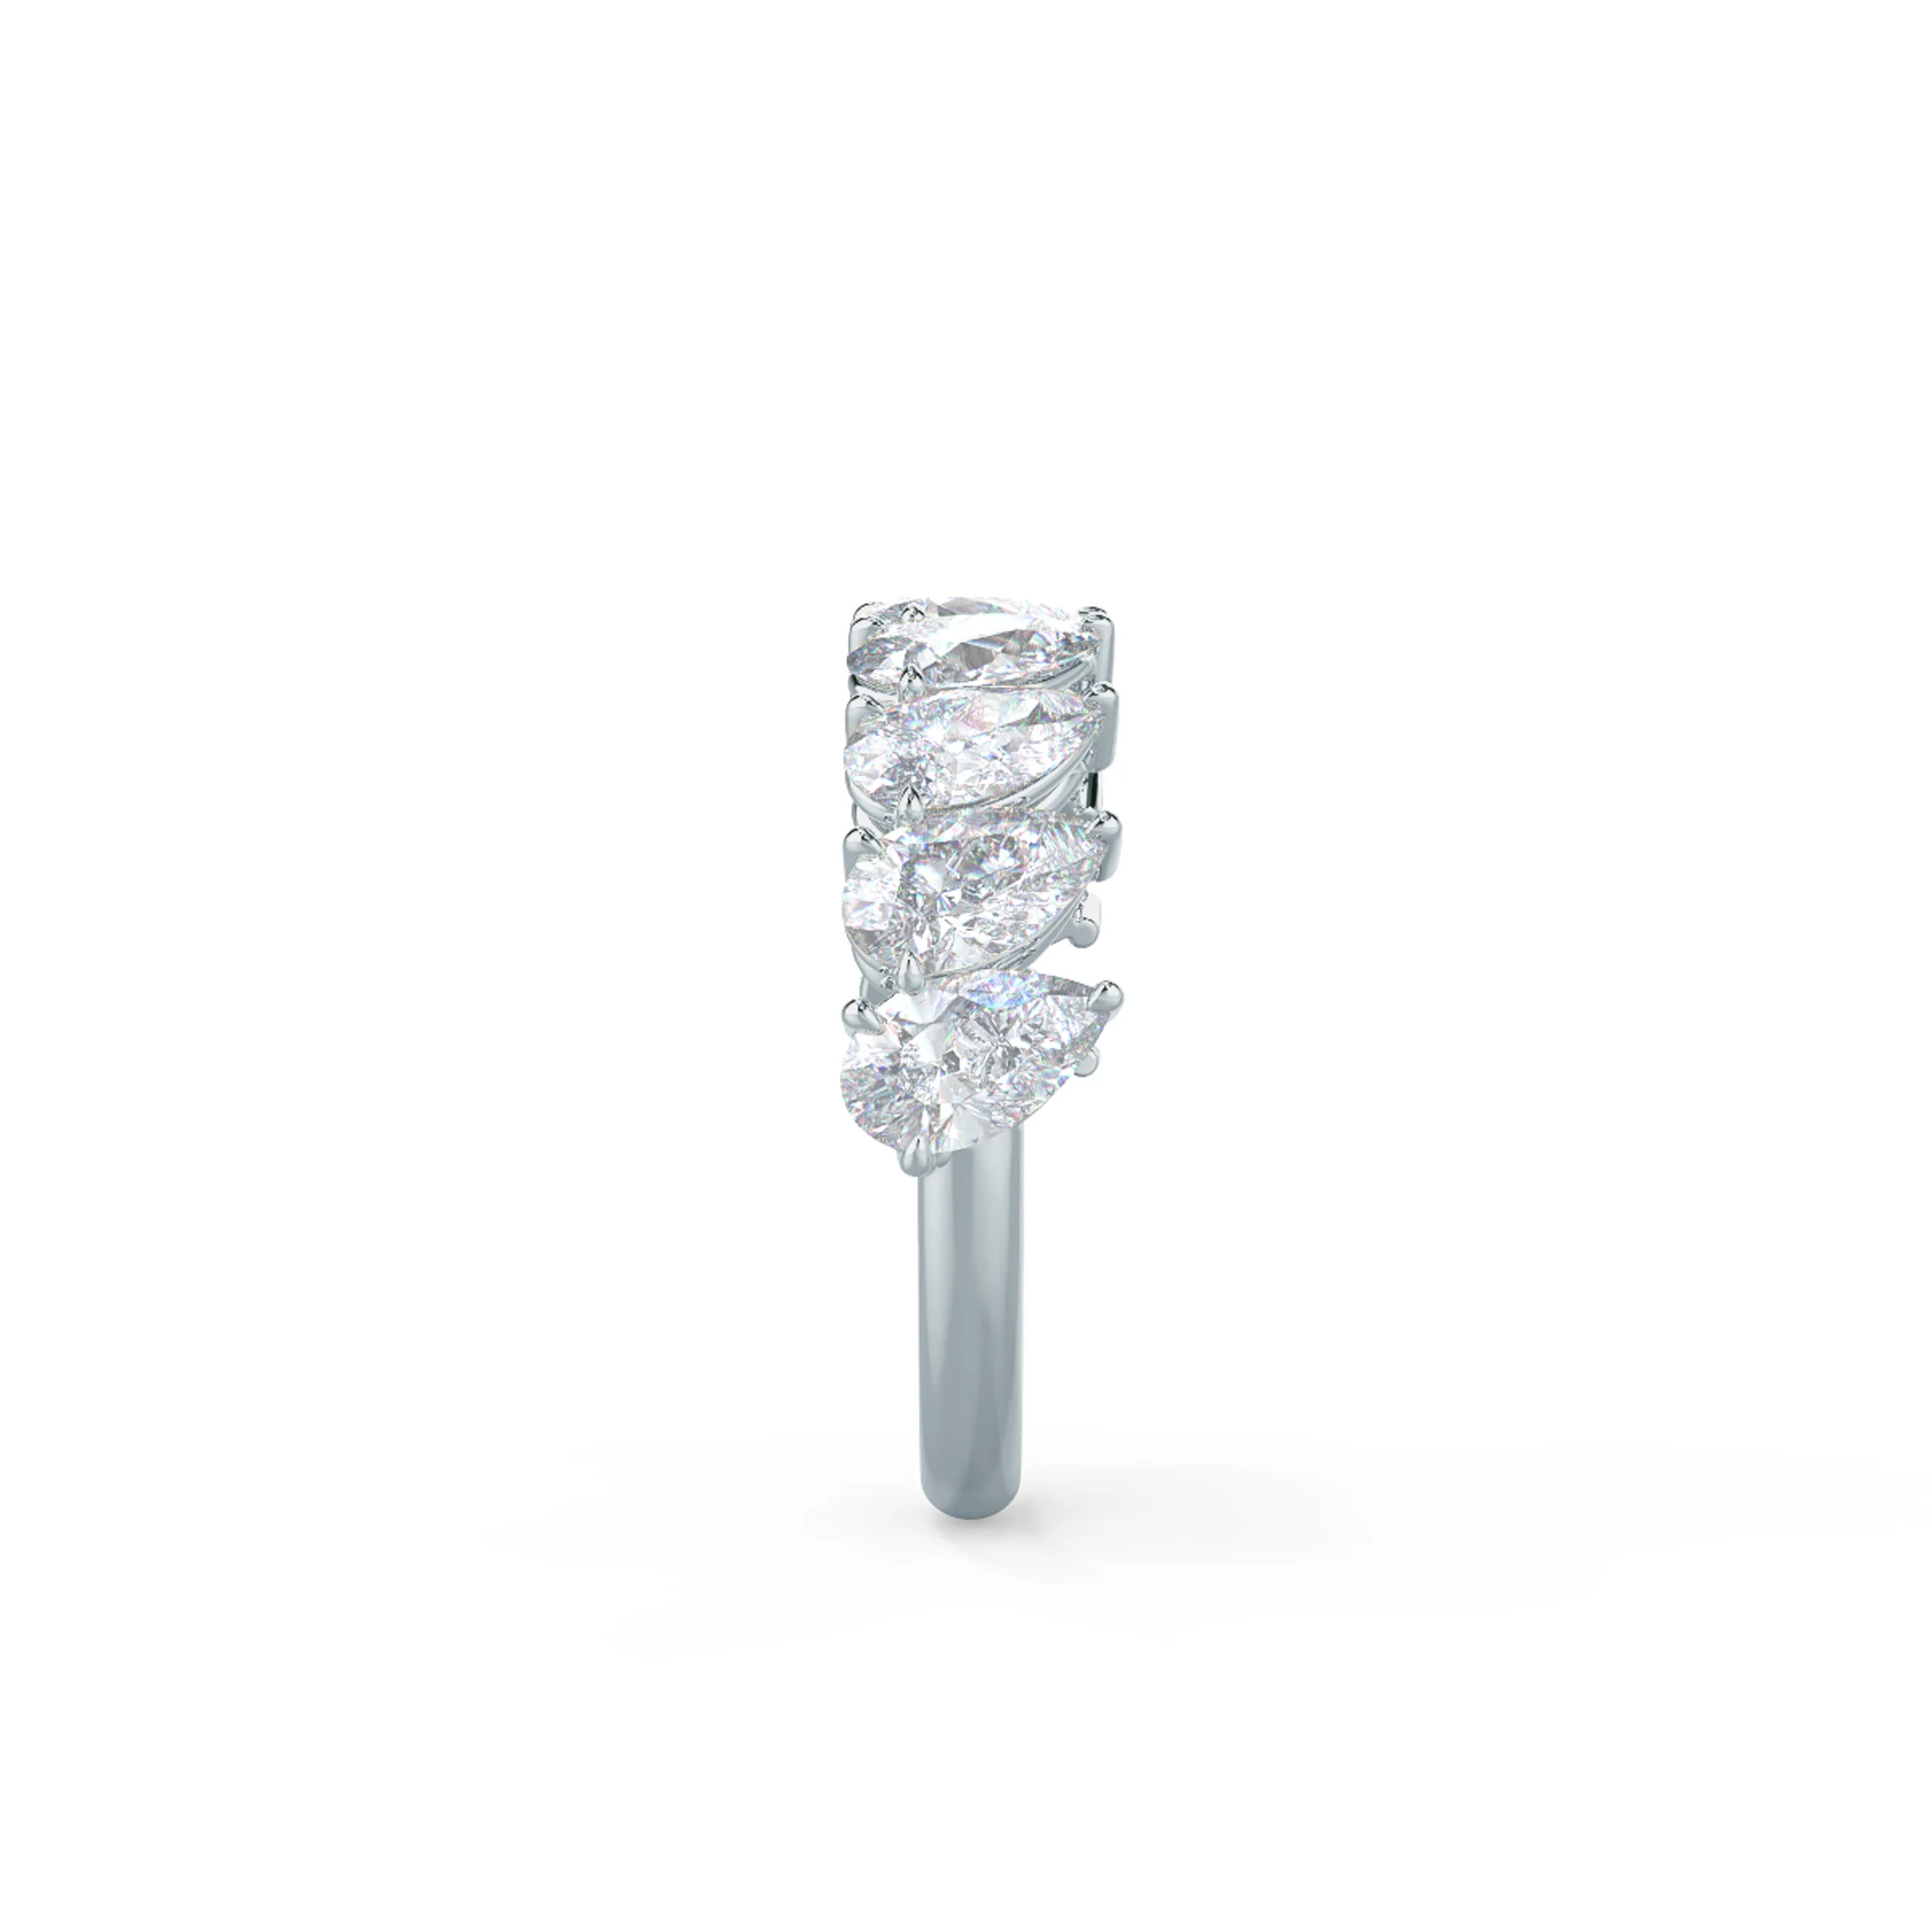 High Quality 2.5 Carat Man Made Diamonds set in 18k White Gold Pear Angled Half Band (Side View)